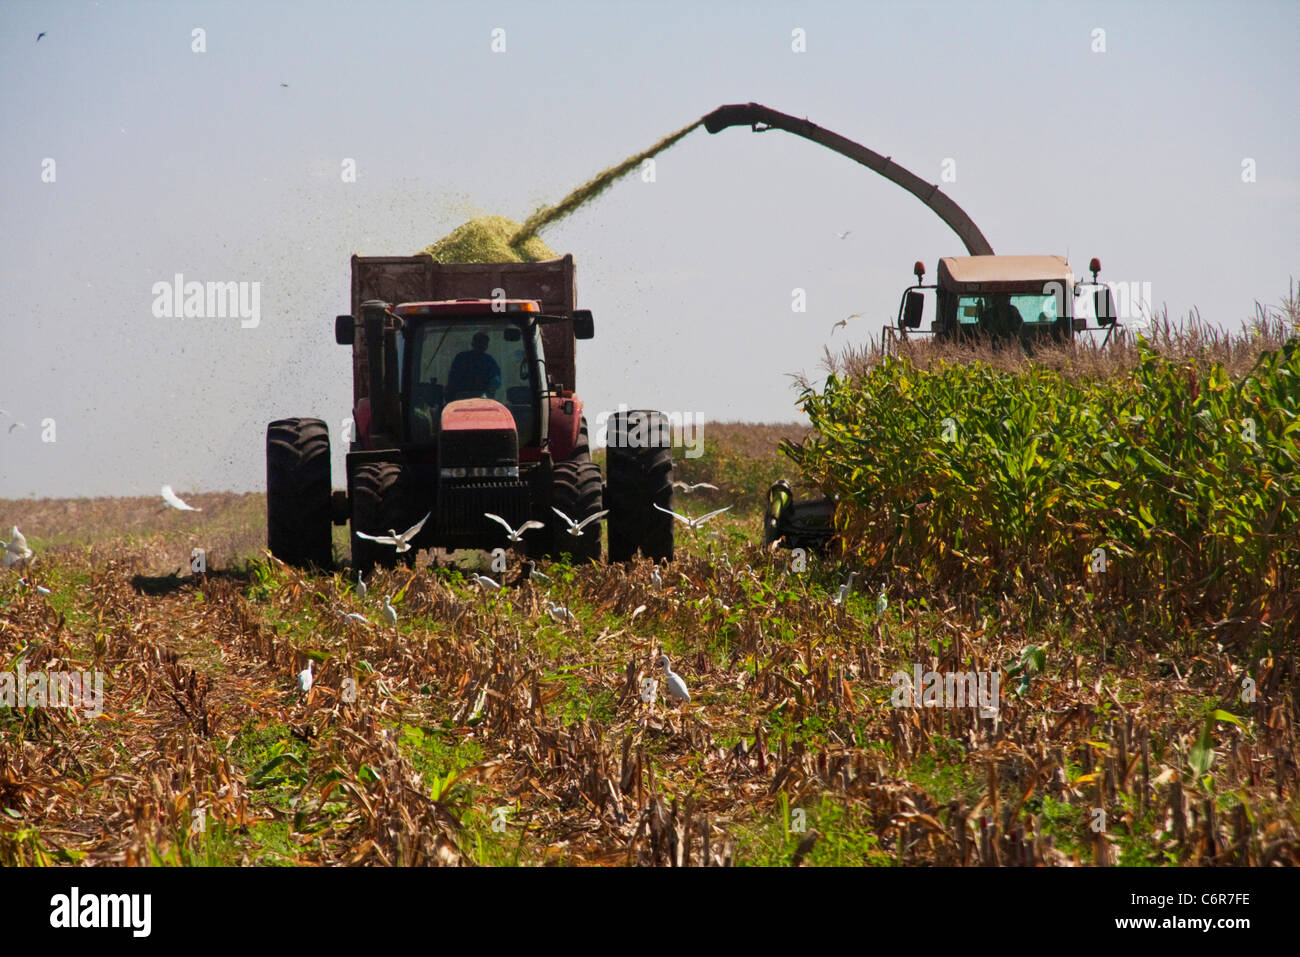 A combine harvester harvesting a maize field Stock Photo